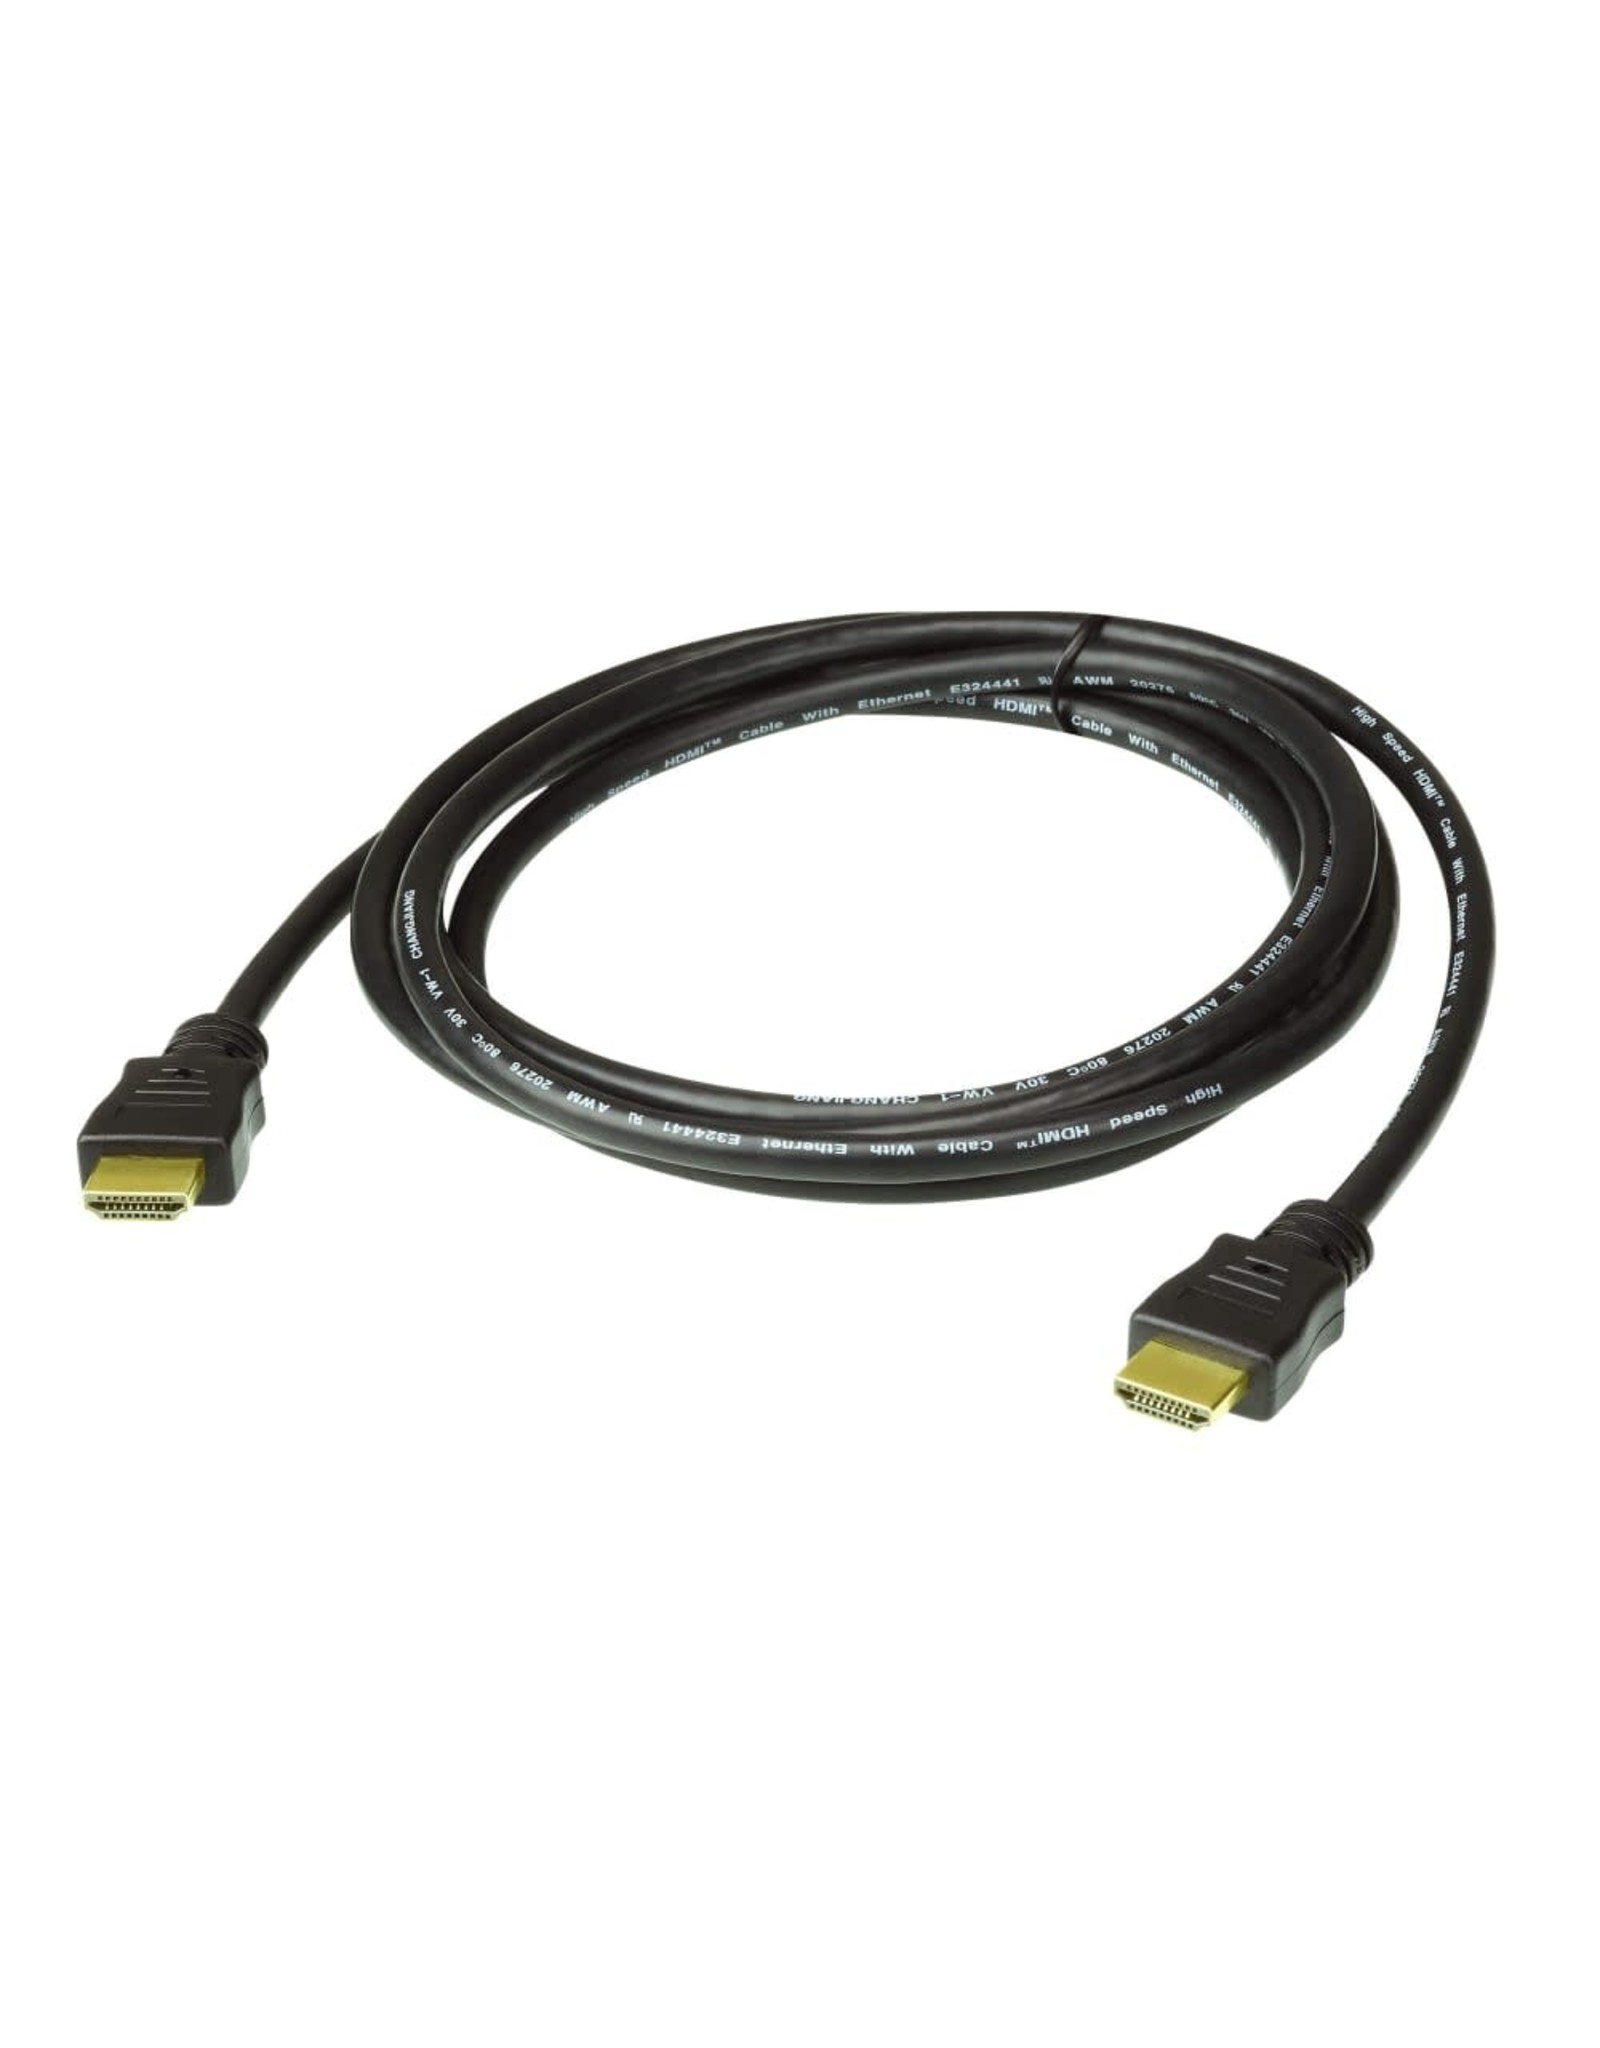 Aten Aten 2M HDMI Cable High Speed HDMI Cable with Ethernet. Support 4K UHD DCI, up to 4096 x 2160 @ 30Hz. Gold-plated connectors